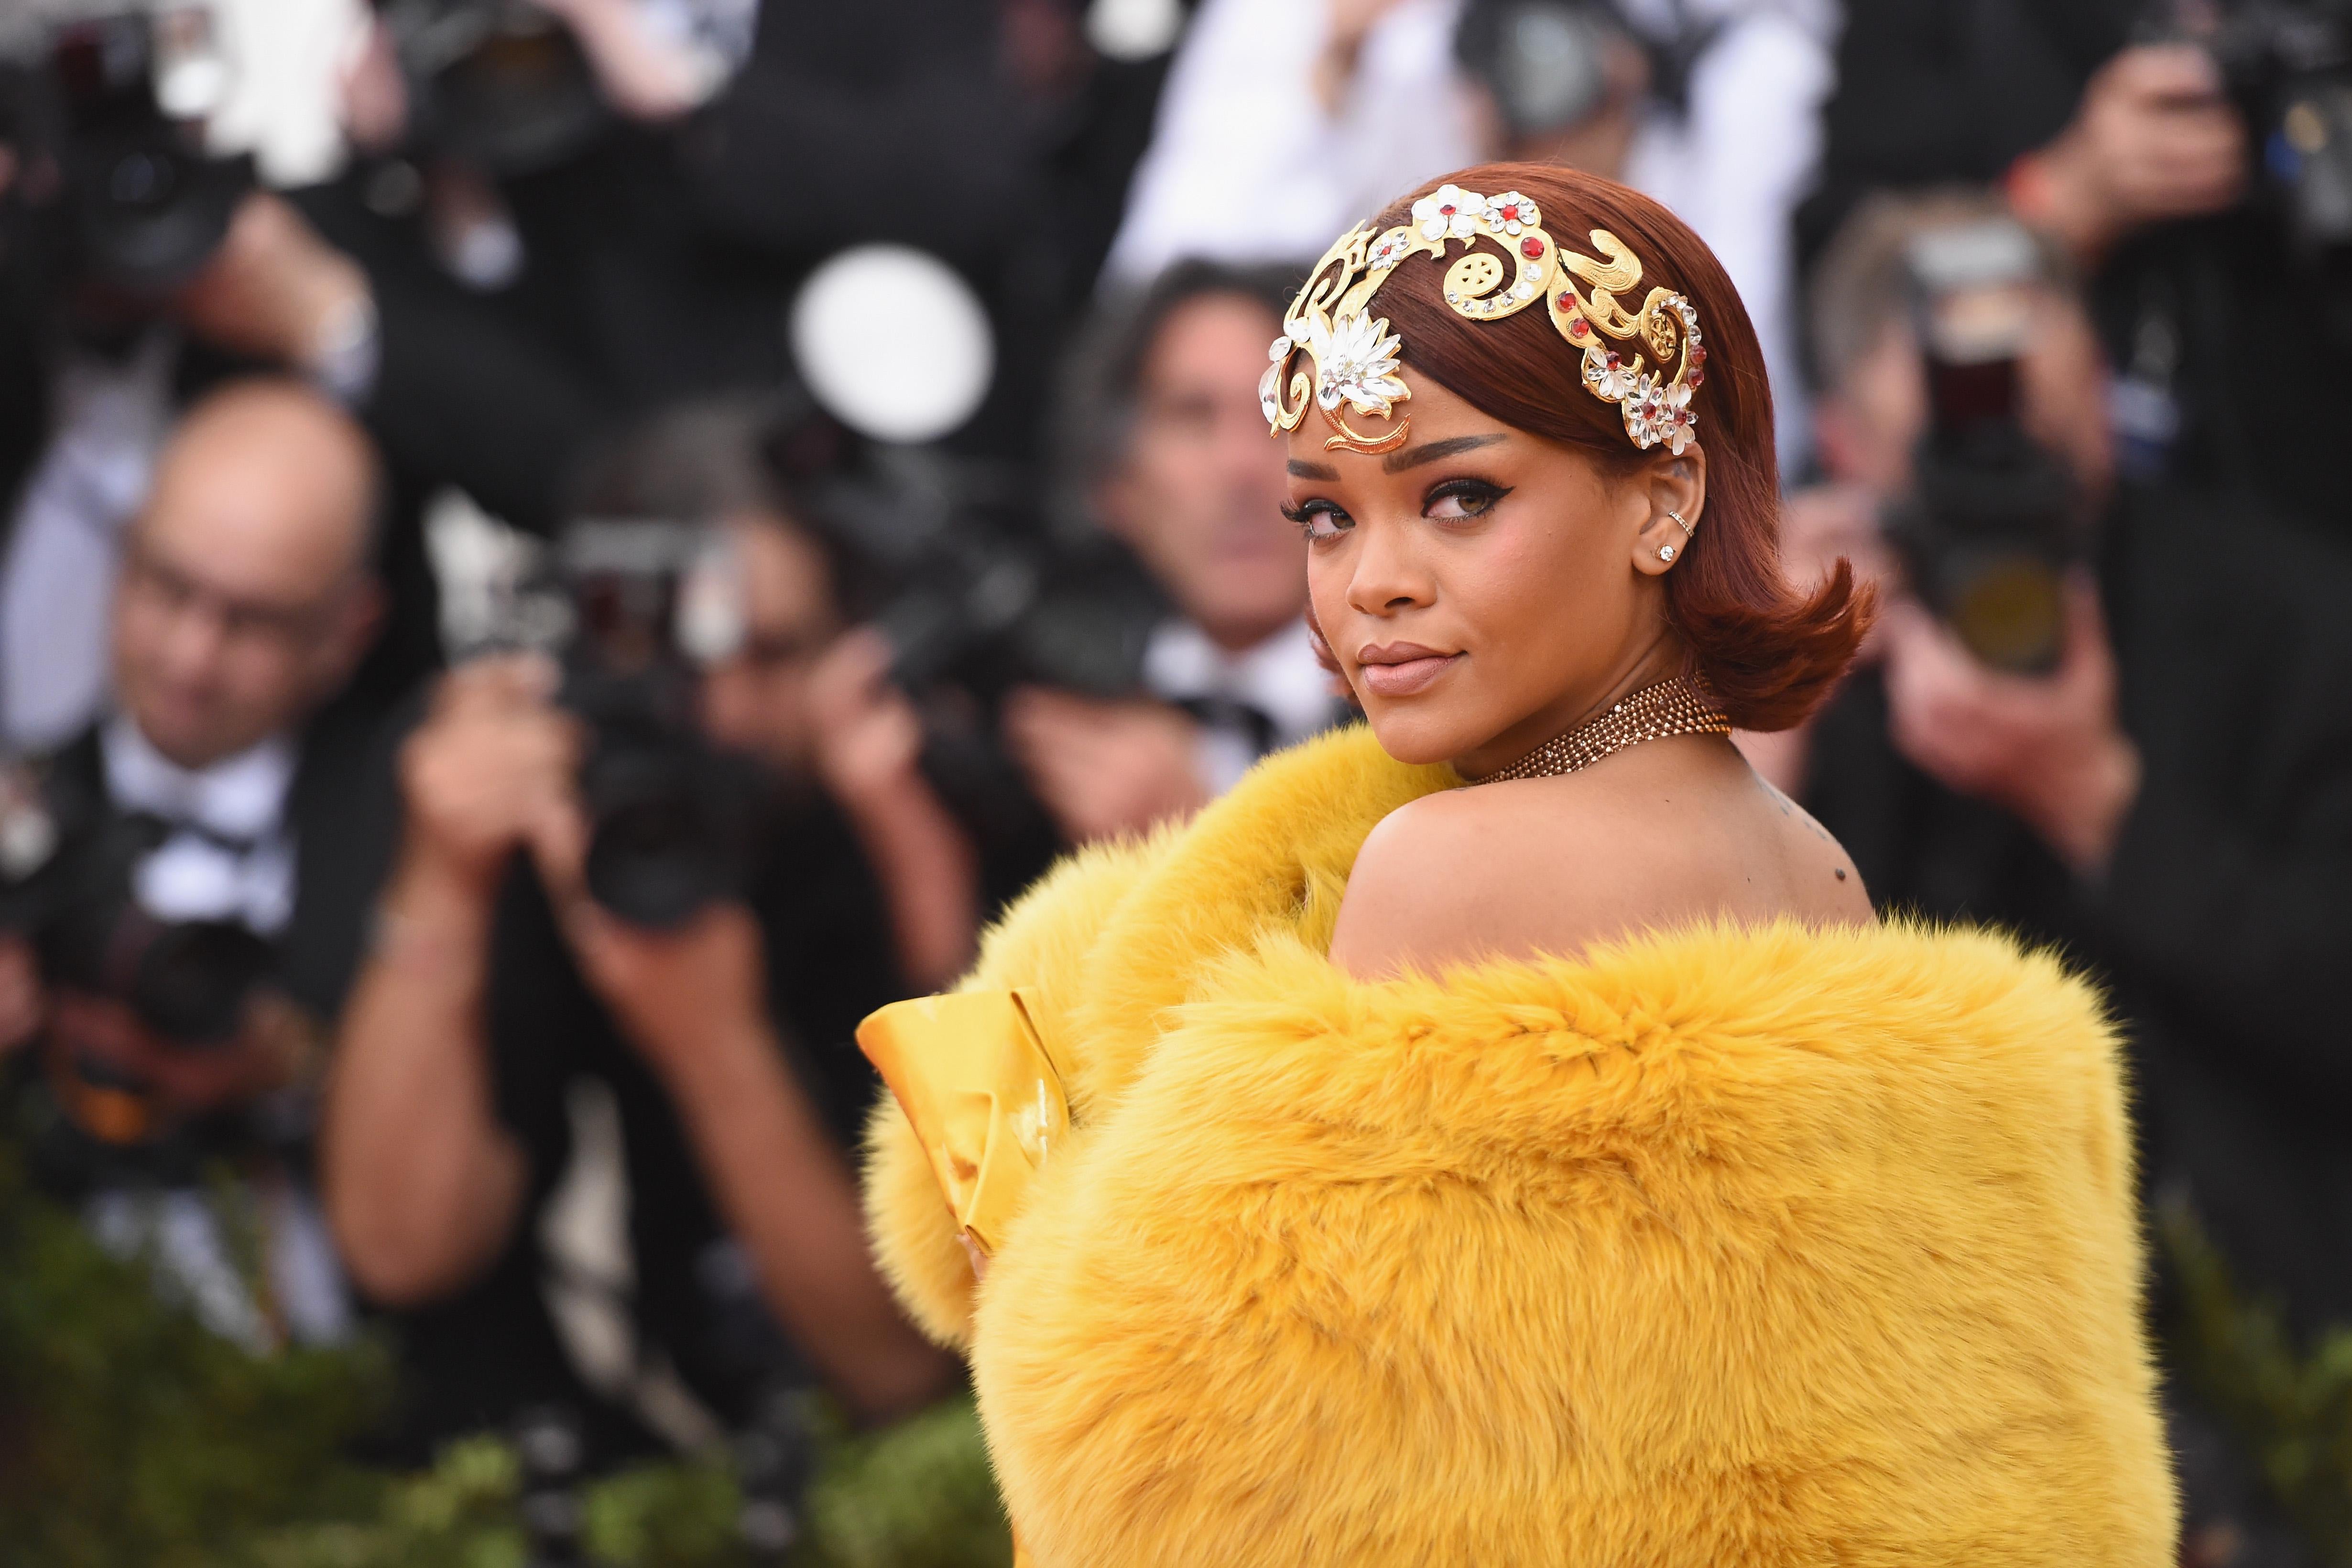 Rihanna looks over her shoulder. She wears a dress that, at the top, resembles a yellow fur capelet.